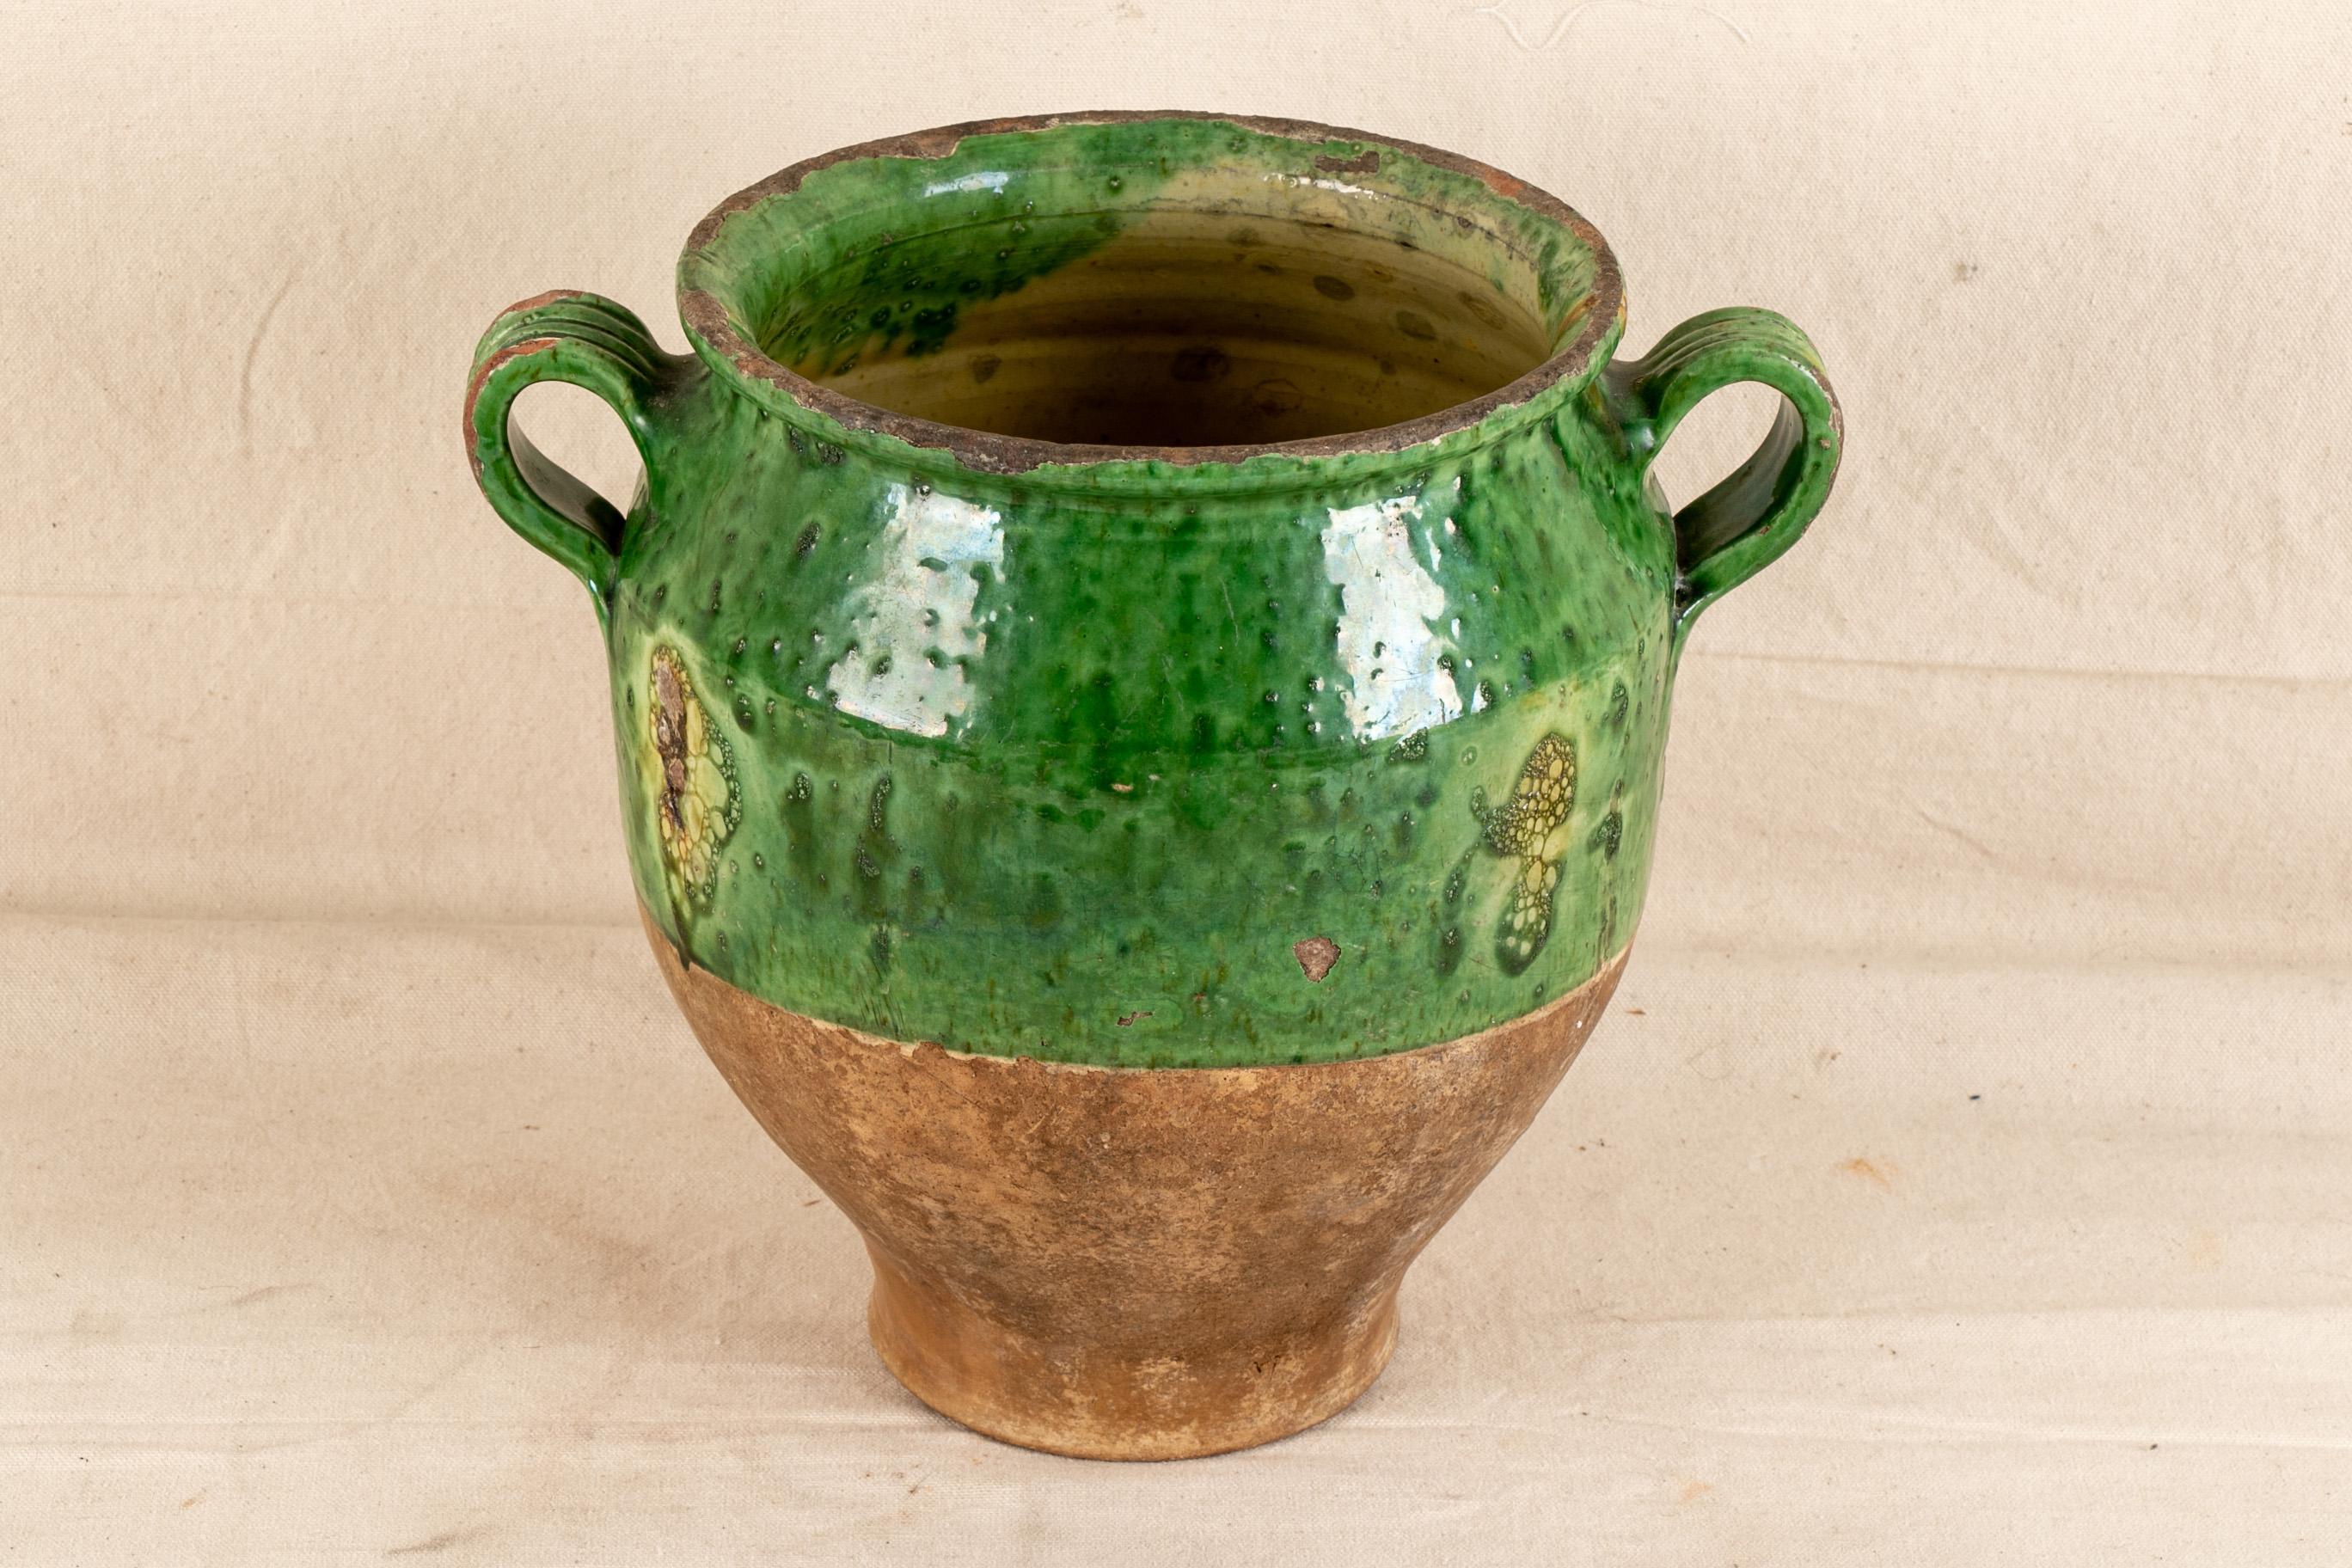 19th century French confit pot, urn form, top half with green glaze and bottom without, flared rim leading to a bulbous top and narrowing toward the base, flanking handles, marked along base 